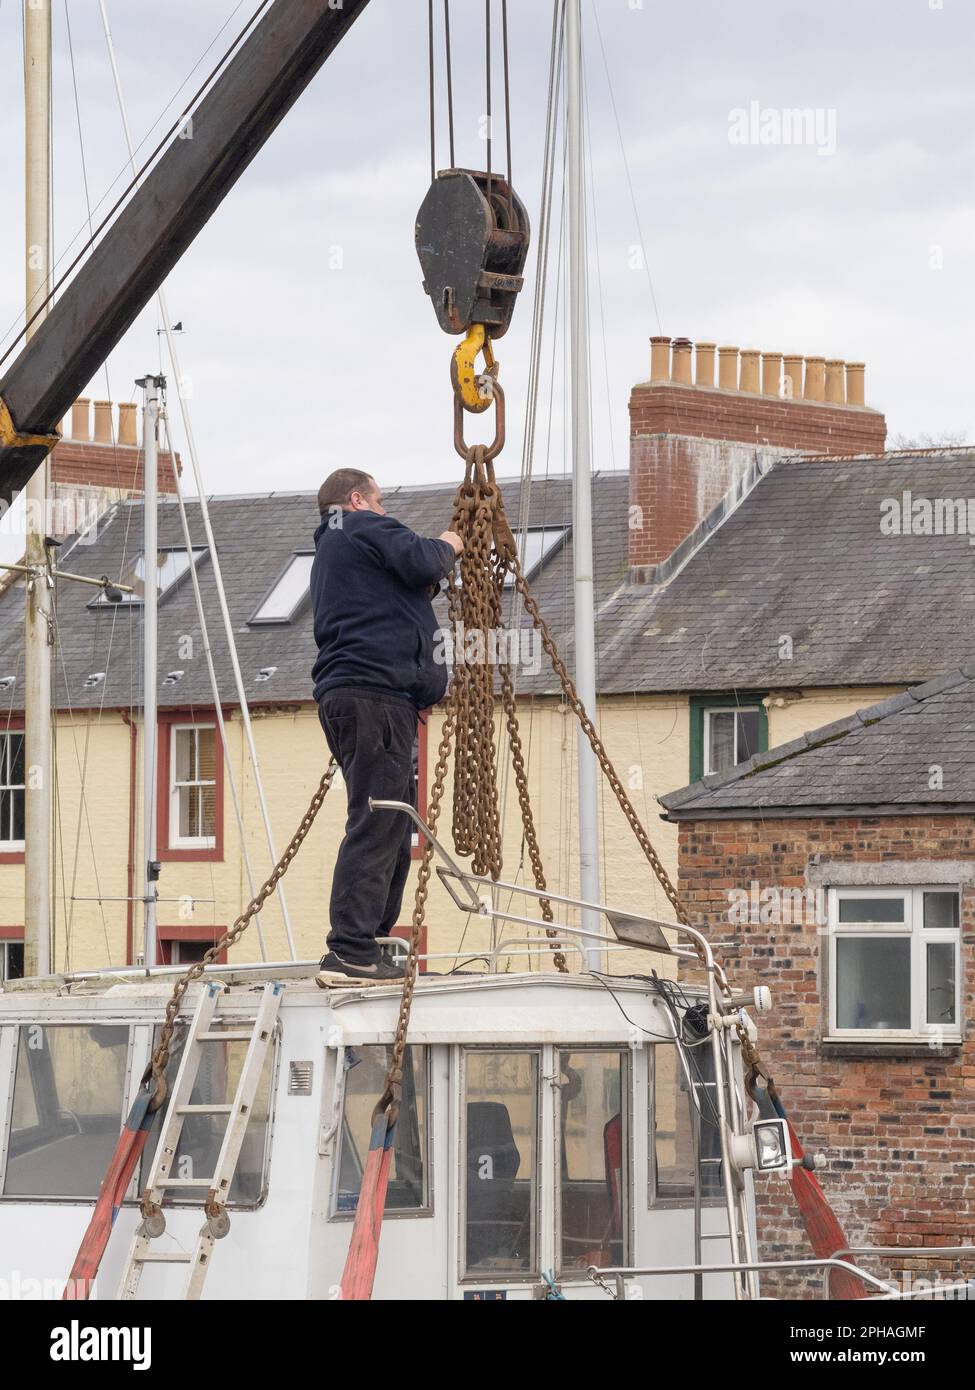 Man adjusts chains prior to lifting a small boat in to the River Nith, Kingholm Quay, Scotland. Stock Photo